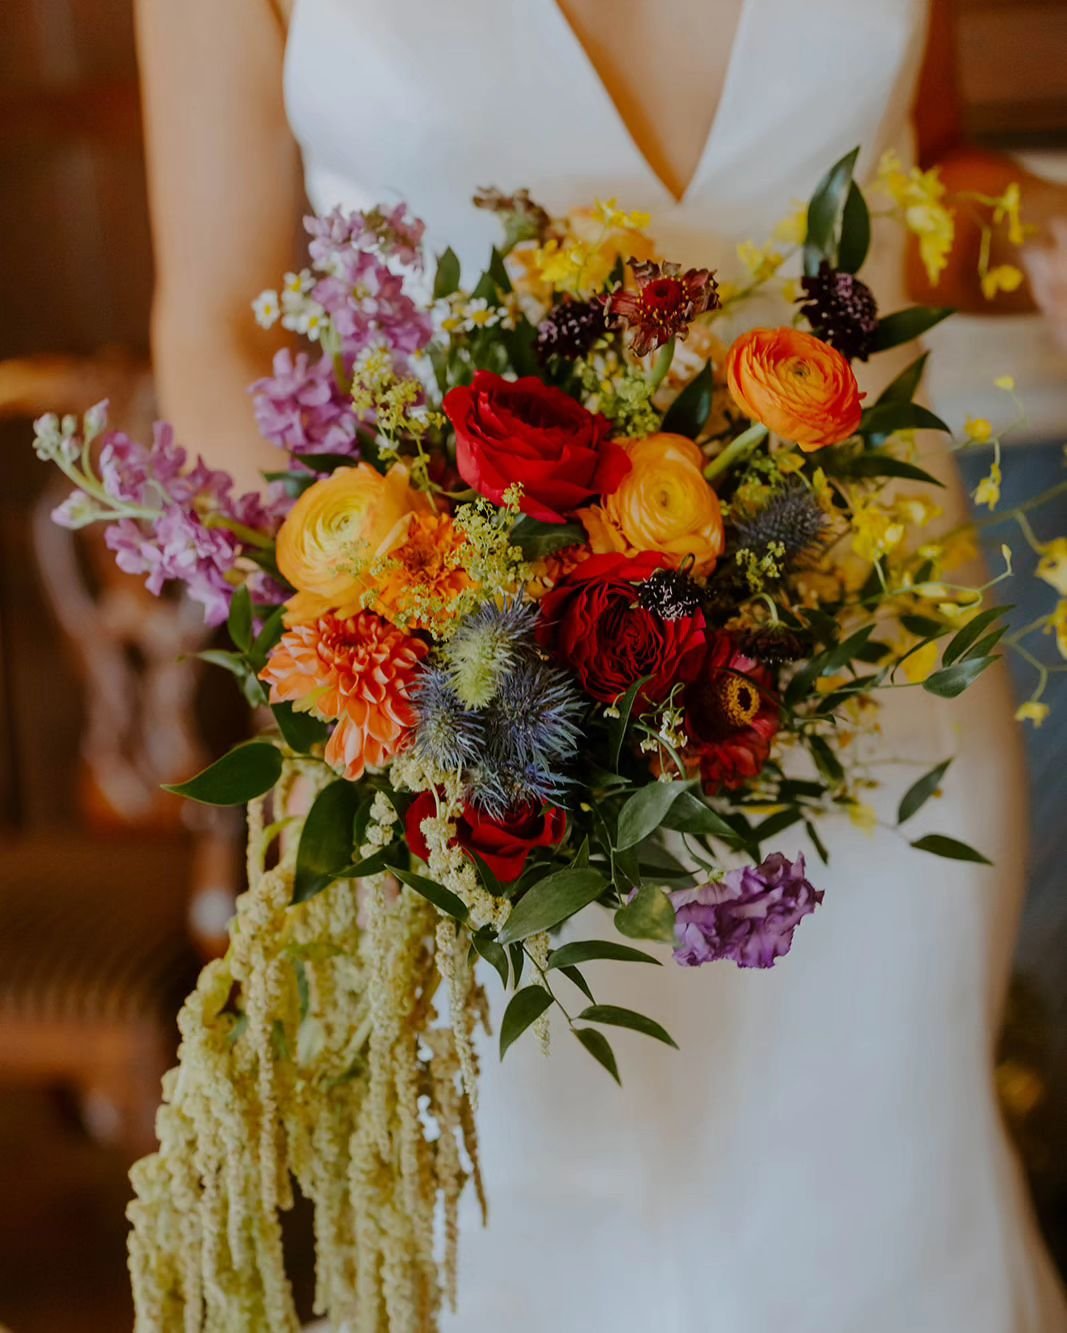 Can we have a little 🌟 commotion ✨  for the bouquet, please?... A beauty filled with amaranth, ranunculus, thistle, dahlia, orchids, zinnia, stock flower, and lisianthus.